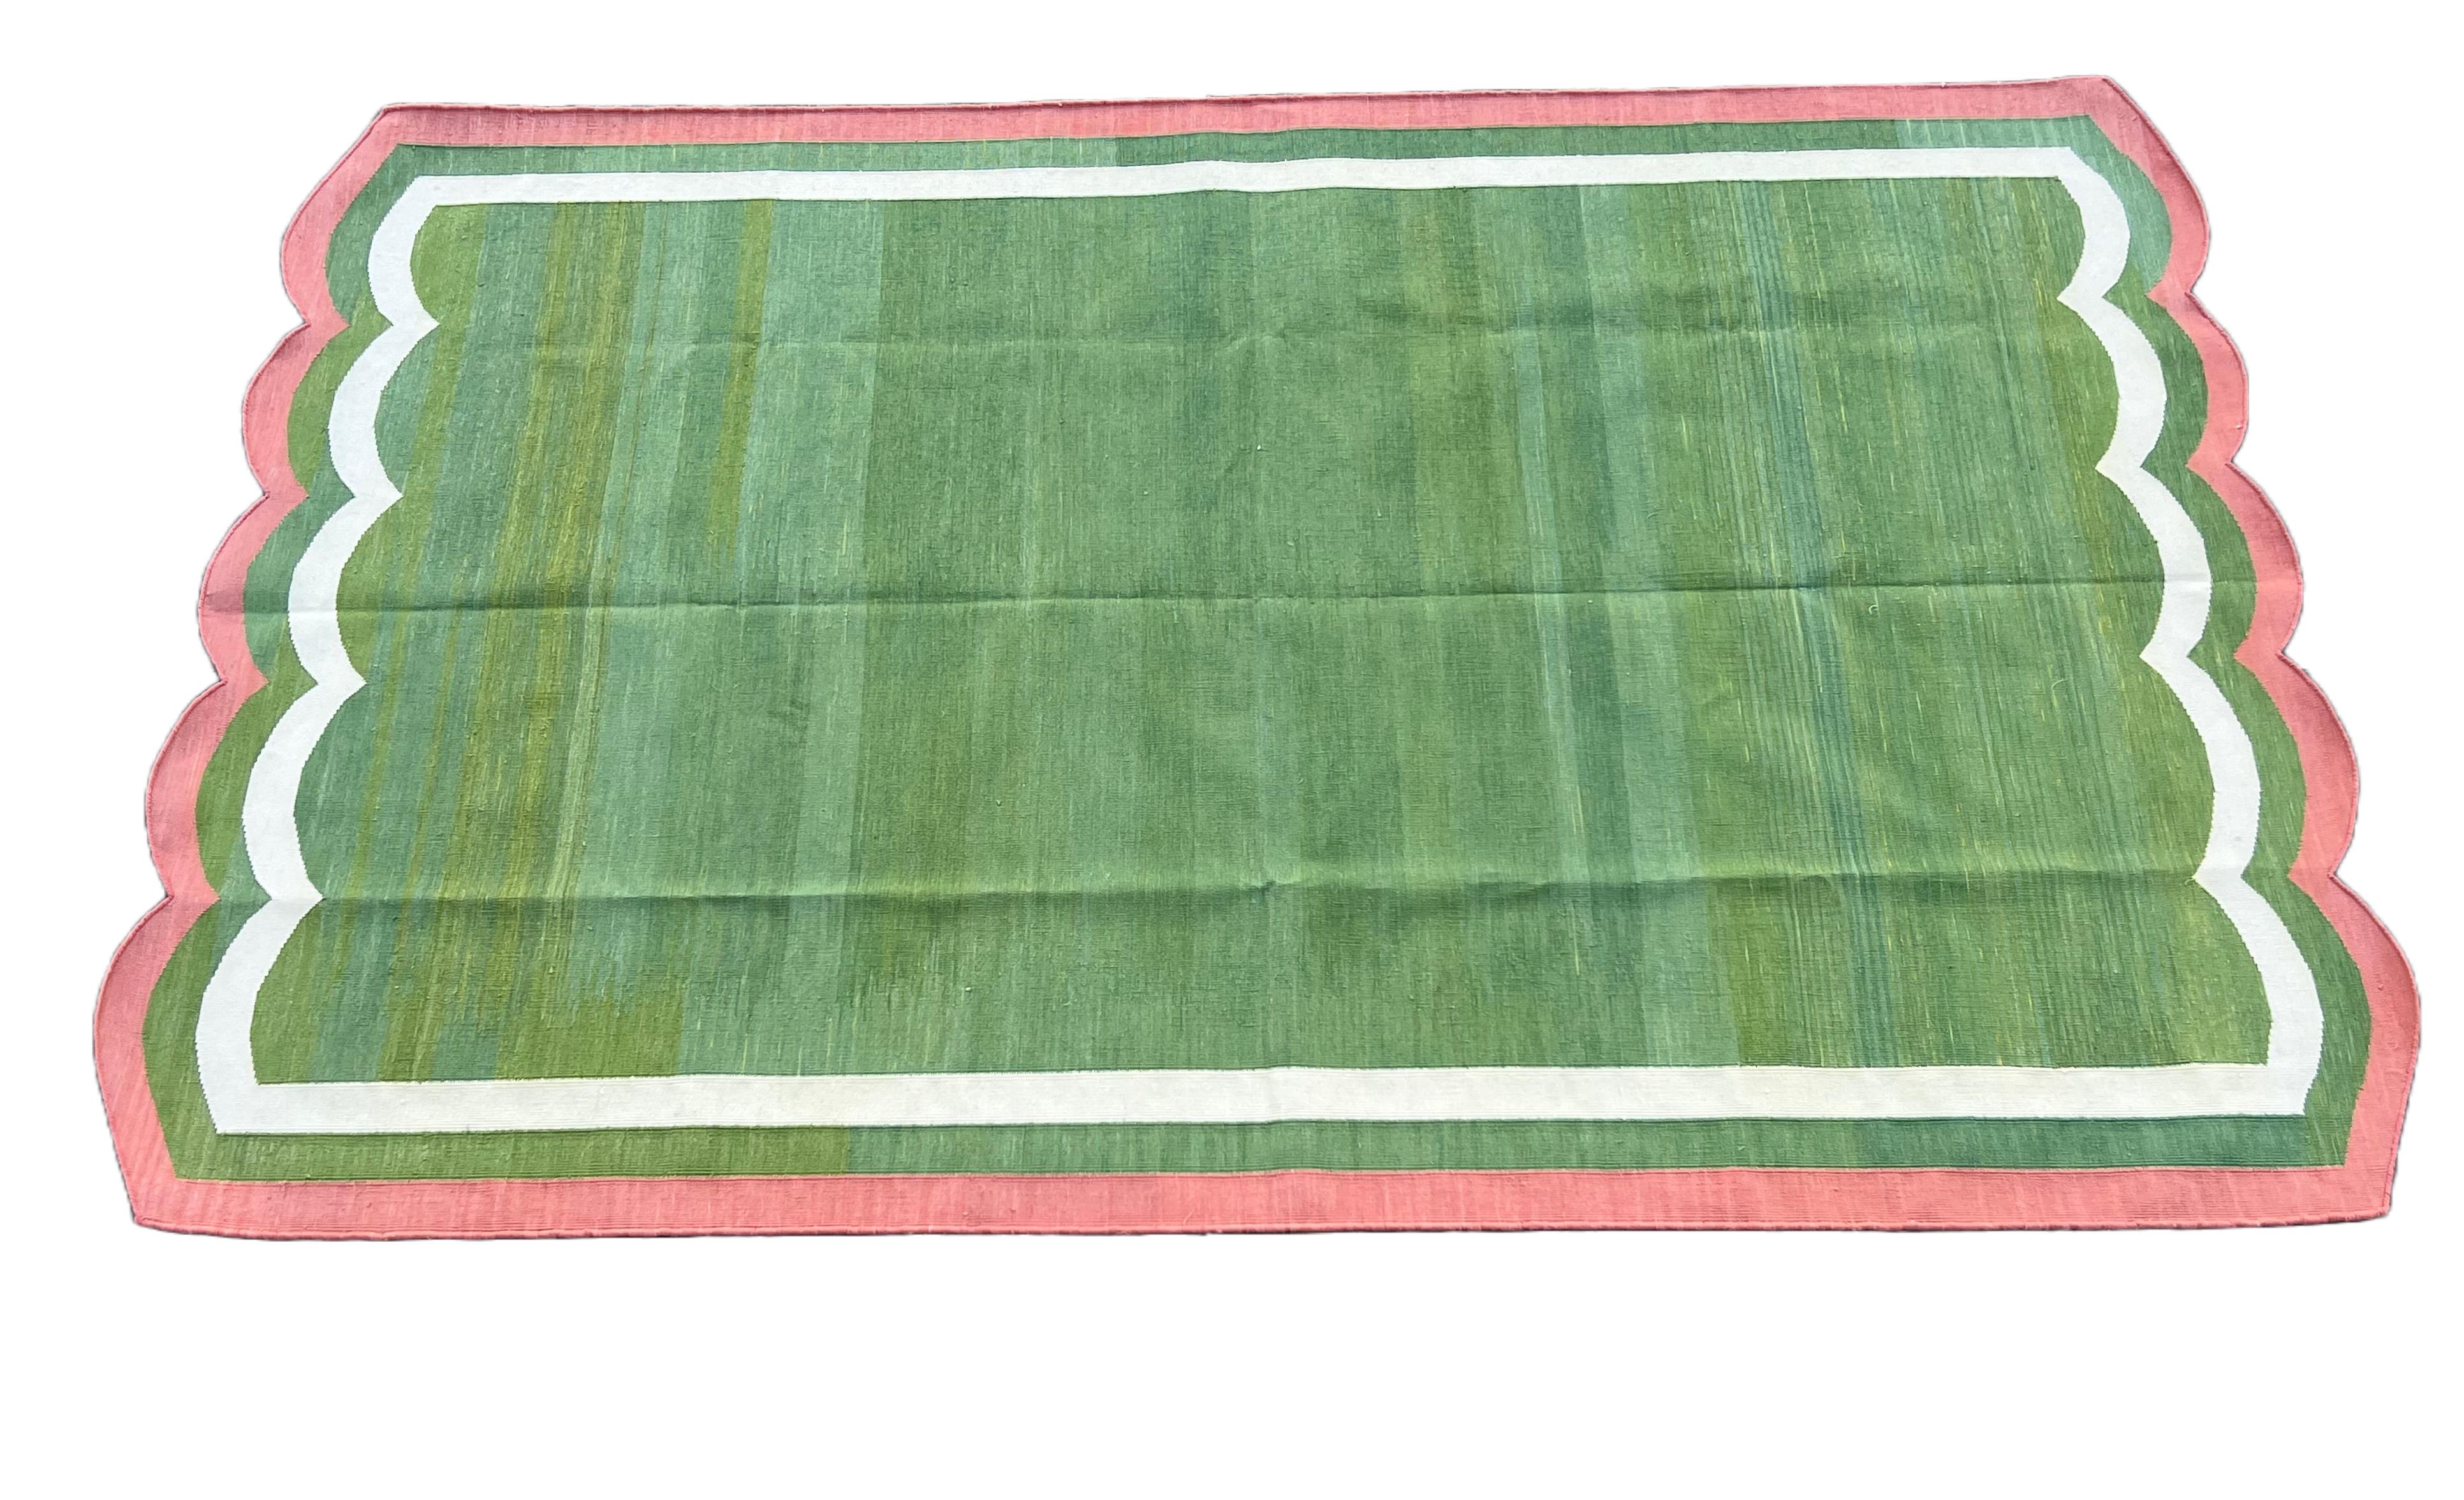 Handmade Cotton Area Flat Weave Rug, 5x8 Green And Pink Scalloped Kilim Dhurrie For Sale 4